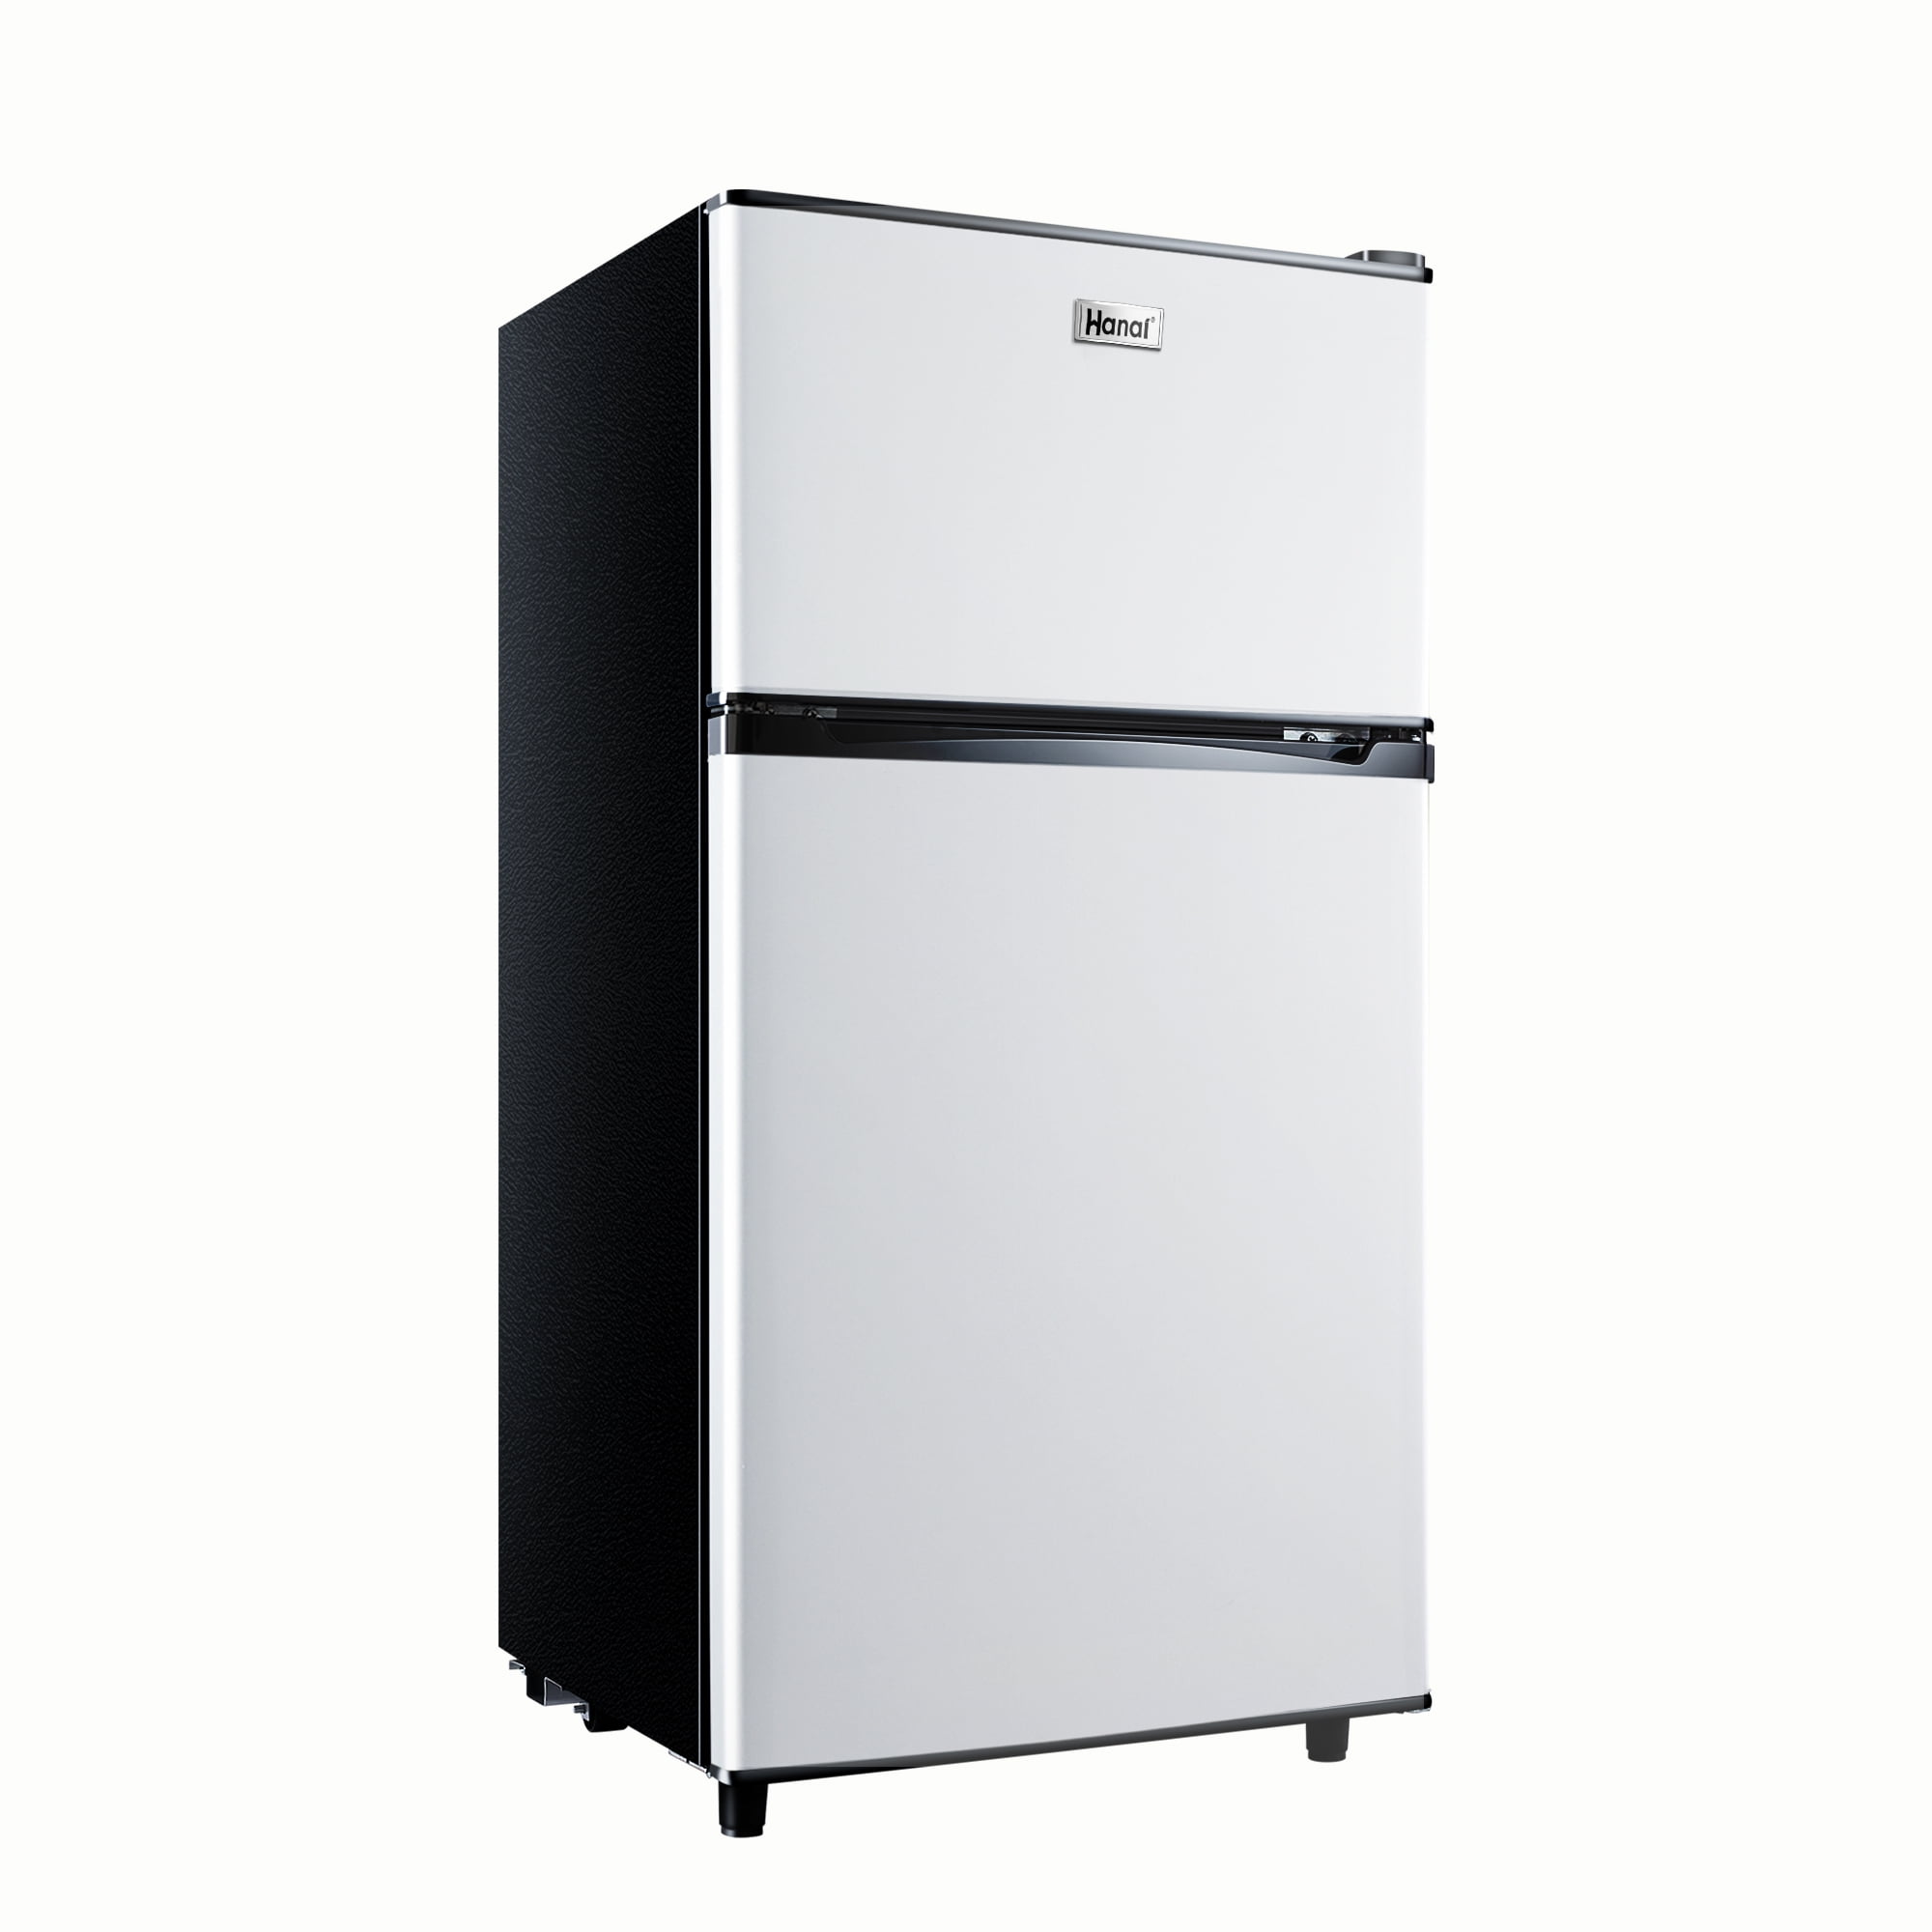 Galanz 4.6. Cu ft Two Door Mini Refrigerator with Freezer, Stainless Steel,  New, Width 19.13 